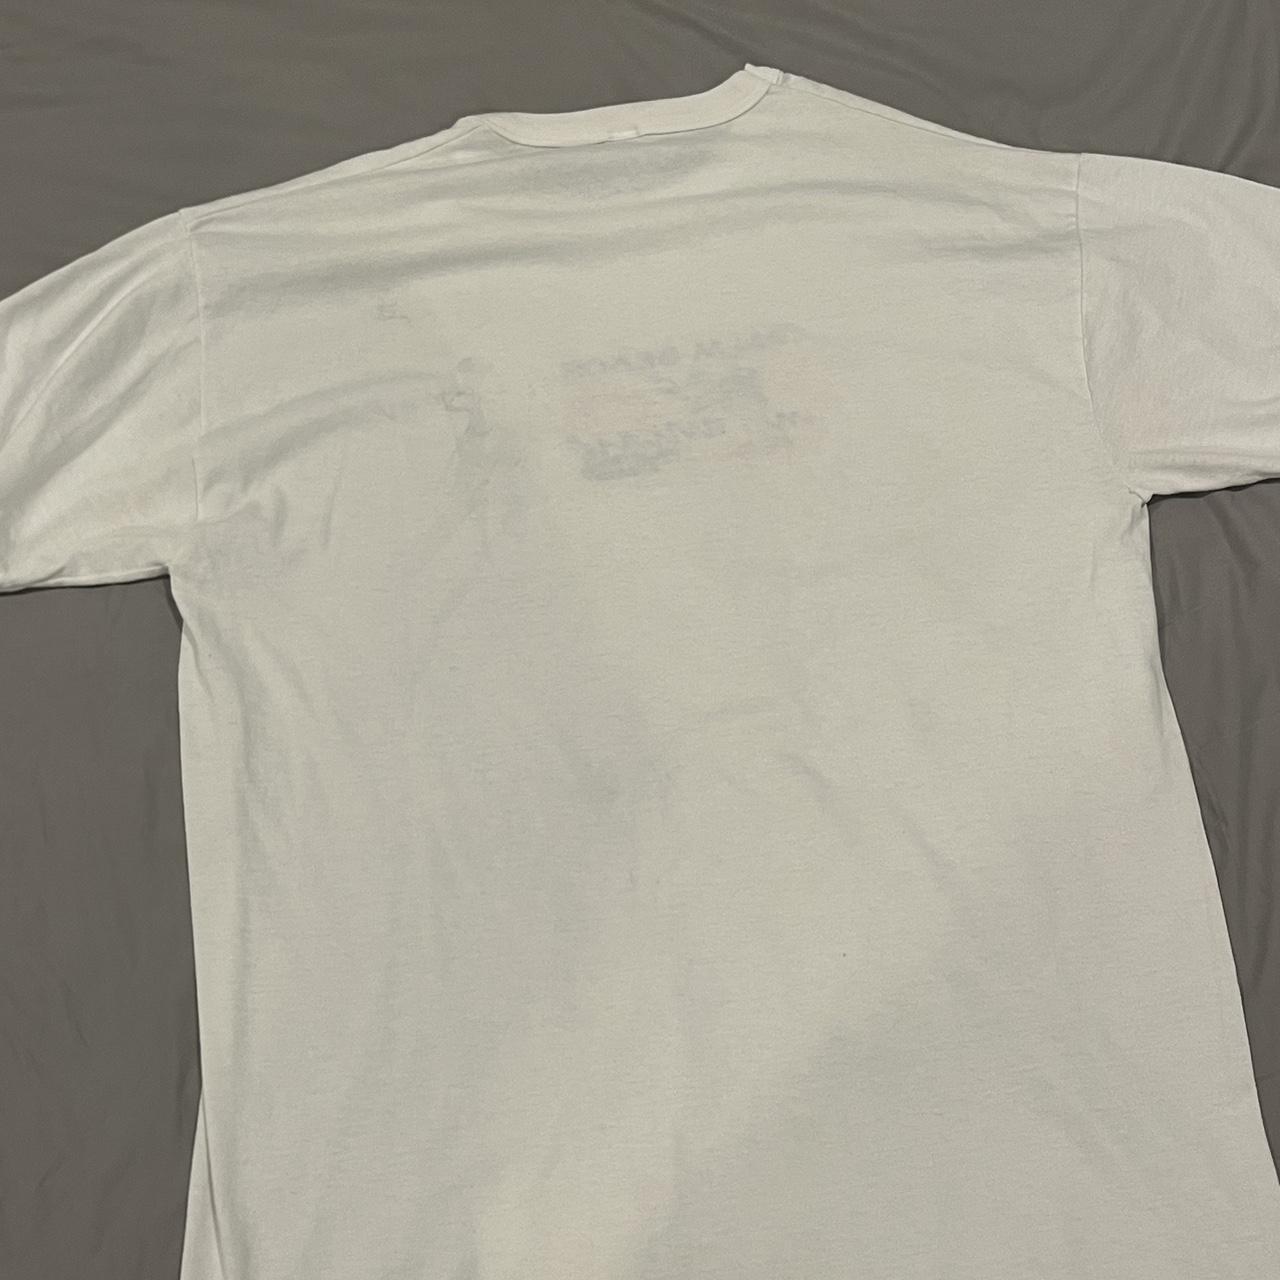 Russell Athletic Men's White T-shirt (3)